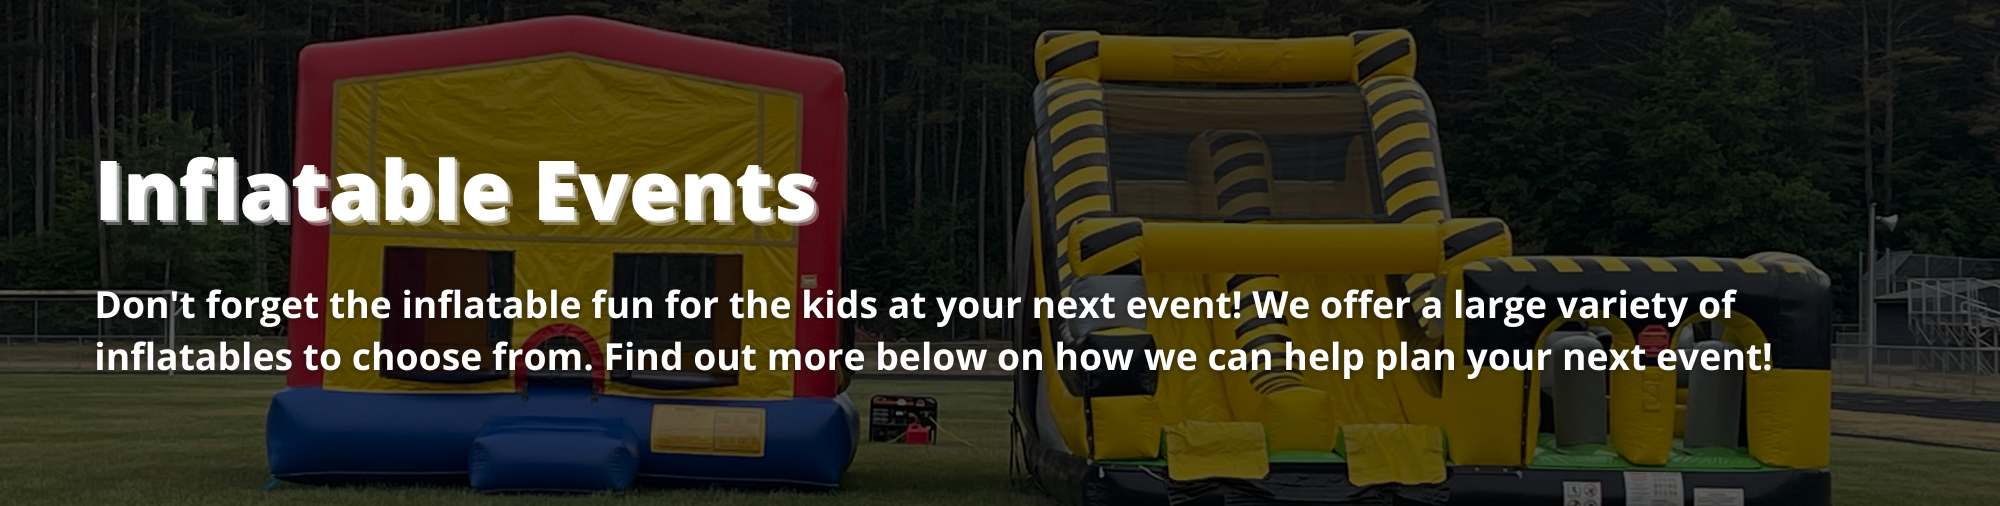 Don't forget the inflatable fun for the kids at your next event! We offer a large varity of inflatables to choose from. Find out more below on how we can help plan your next event!